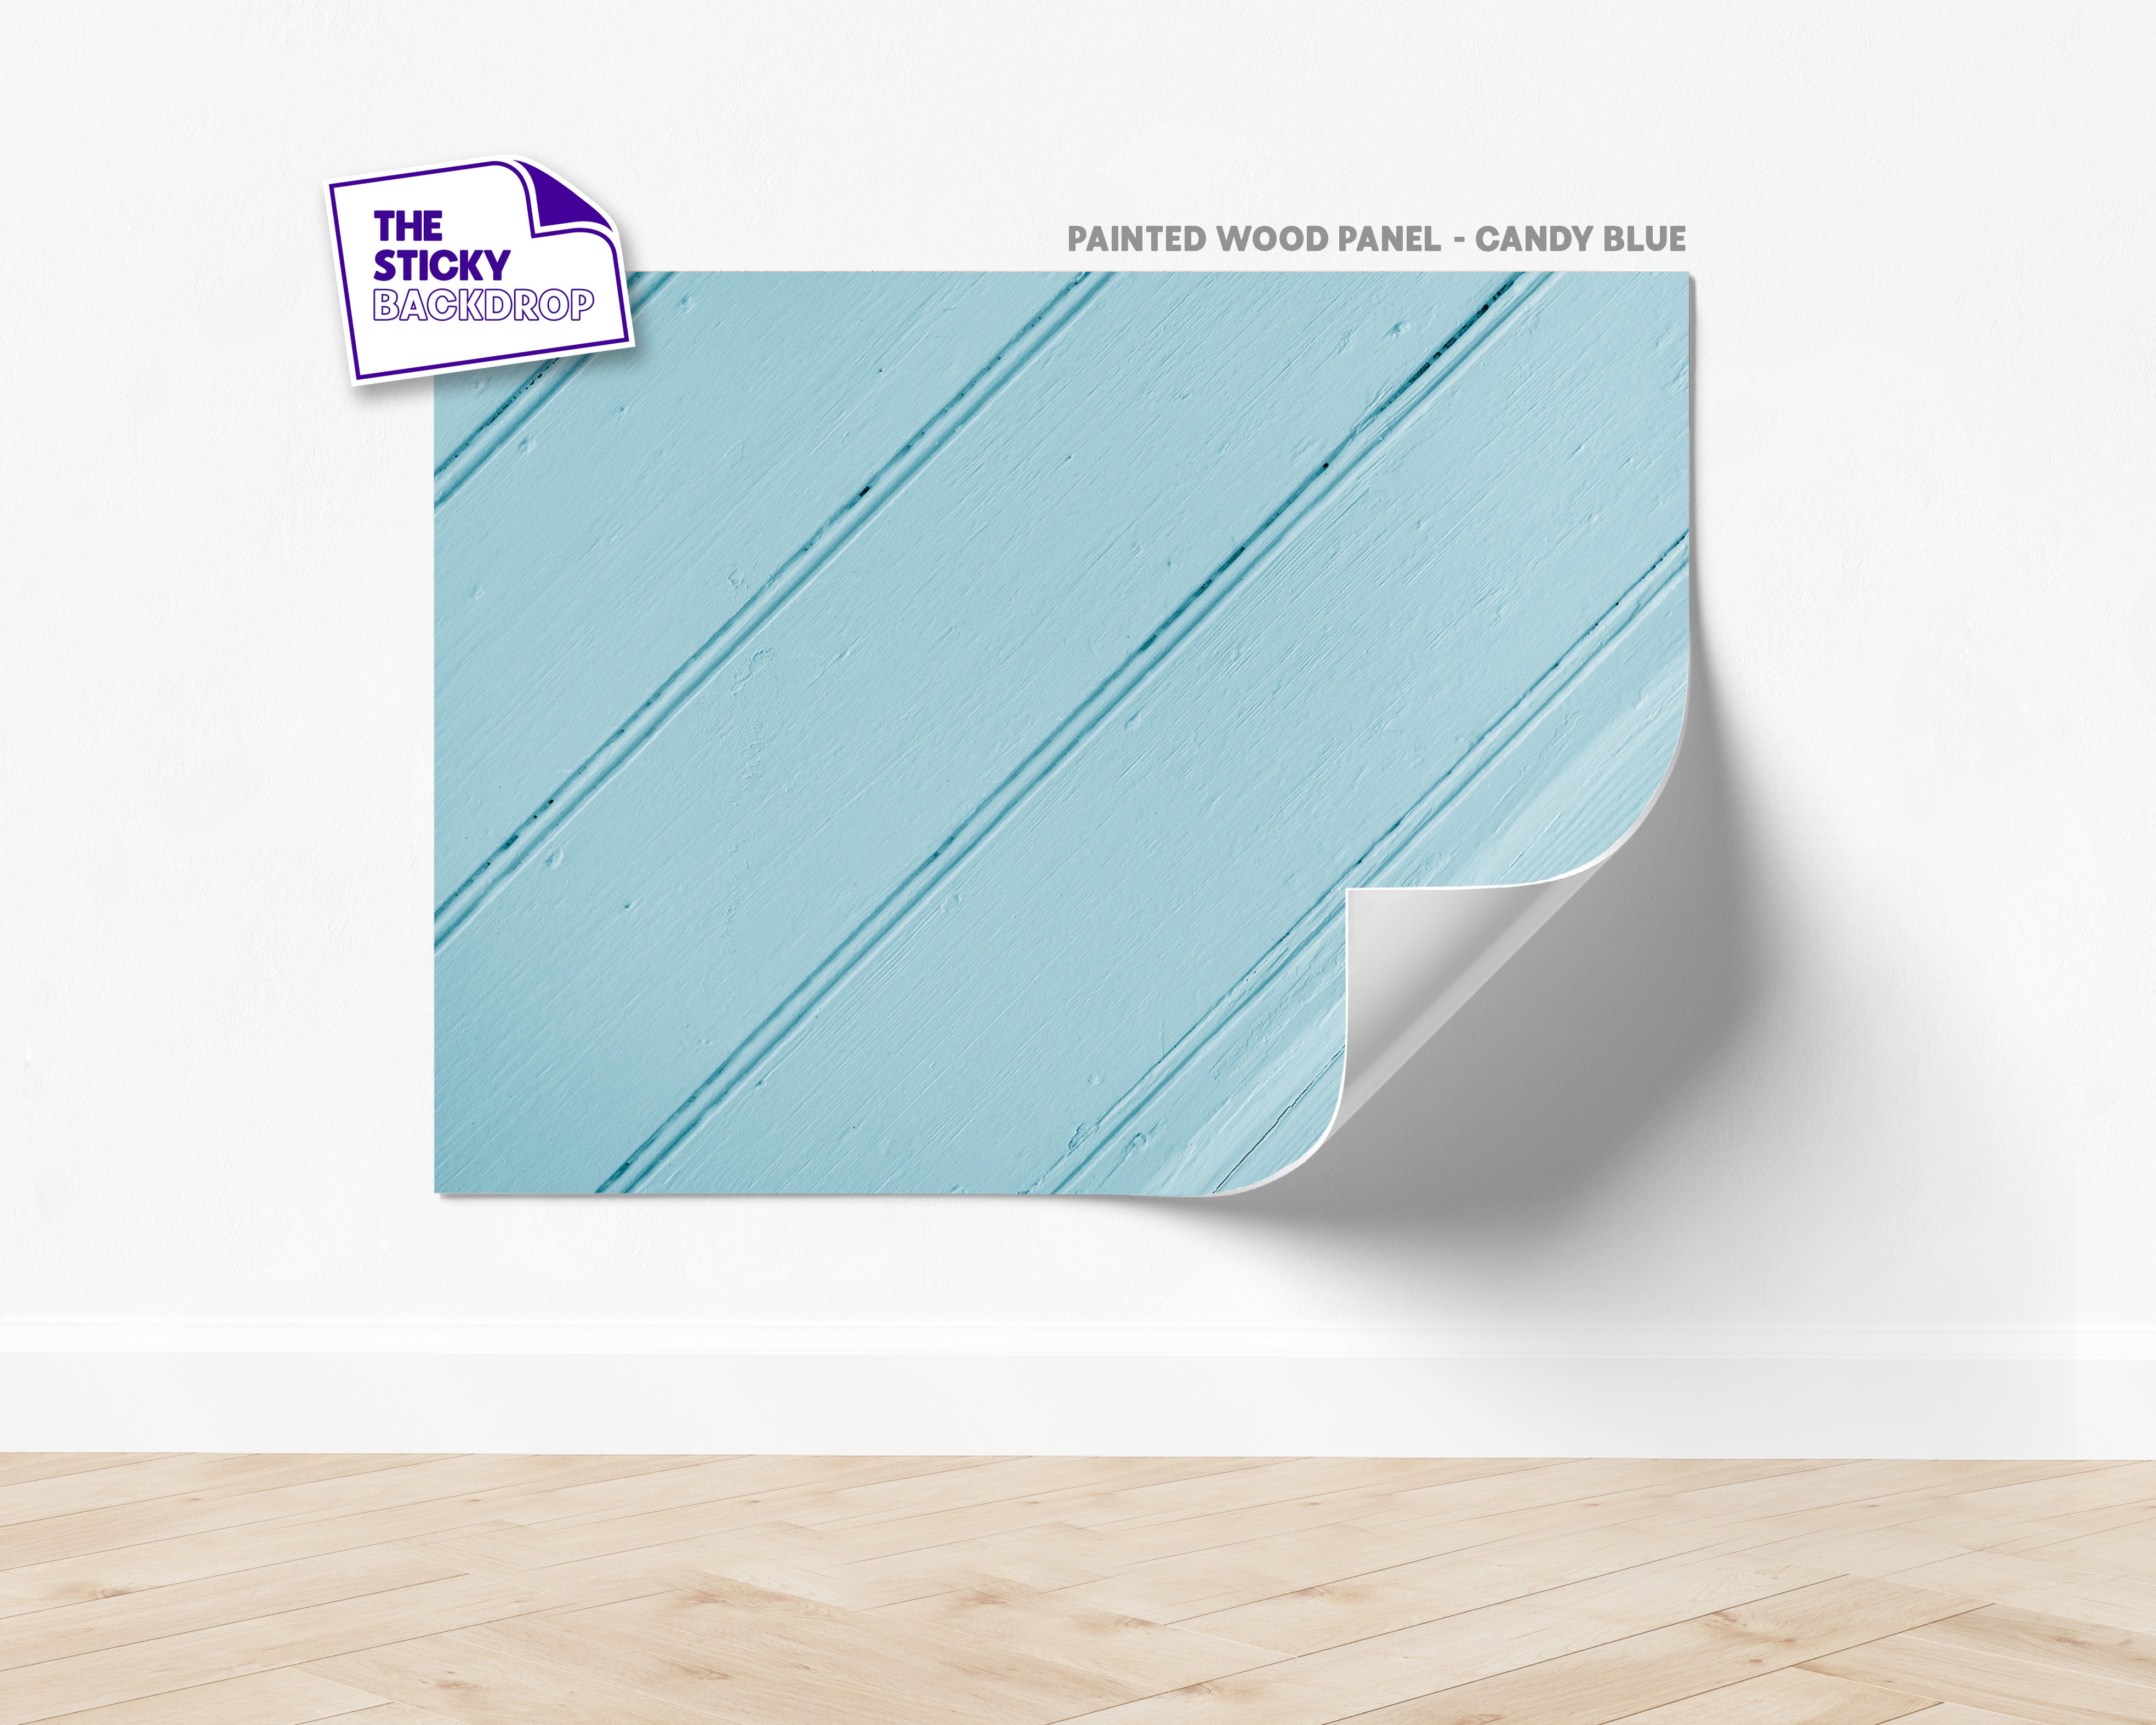 Painted Wood Panel | Candy Blue